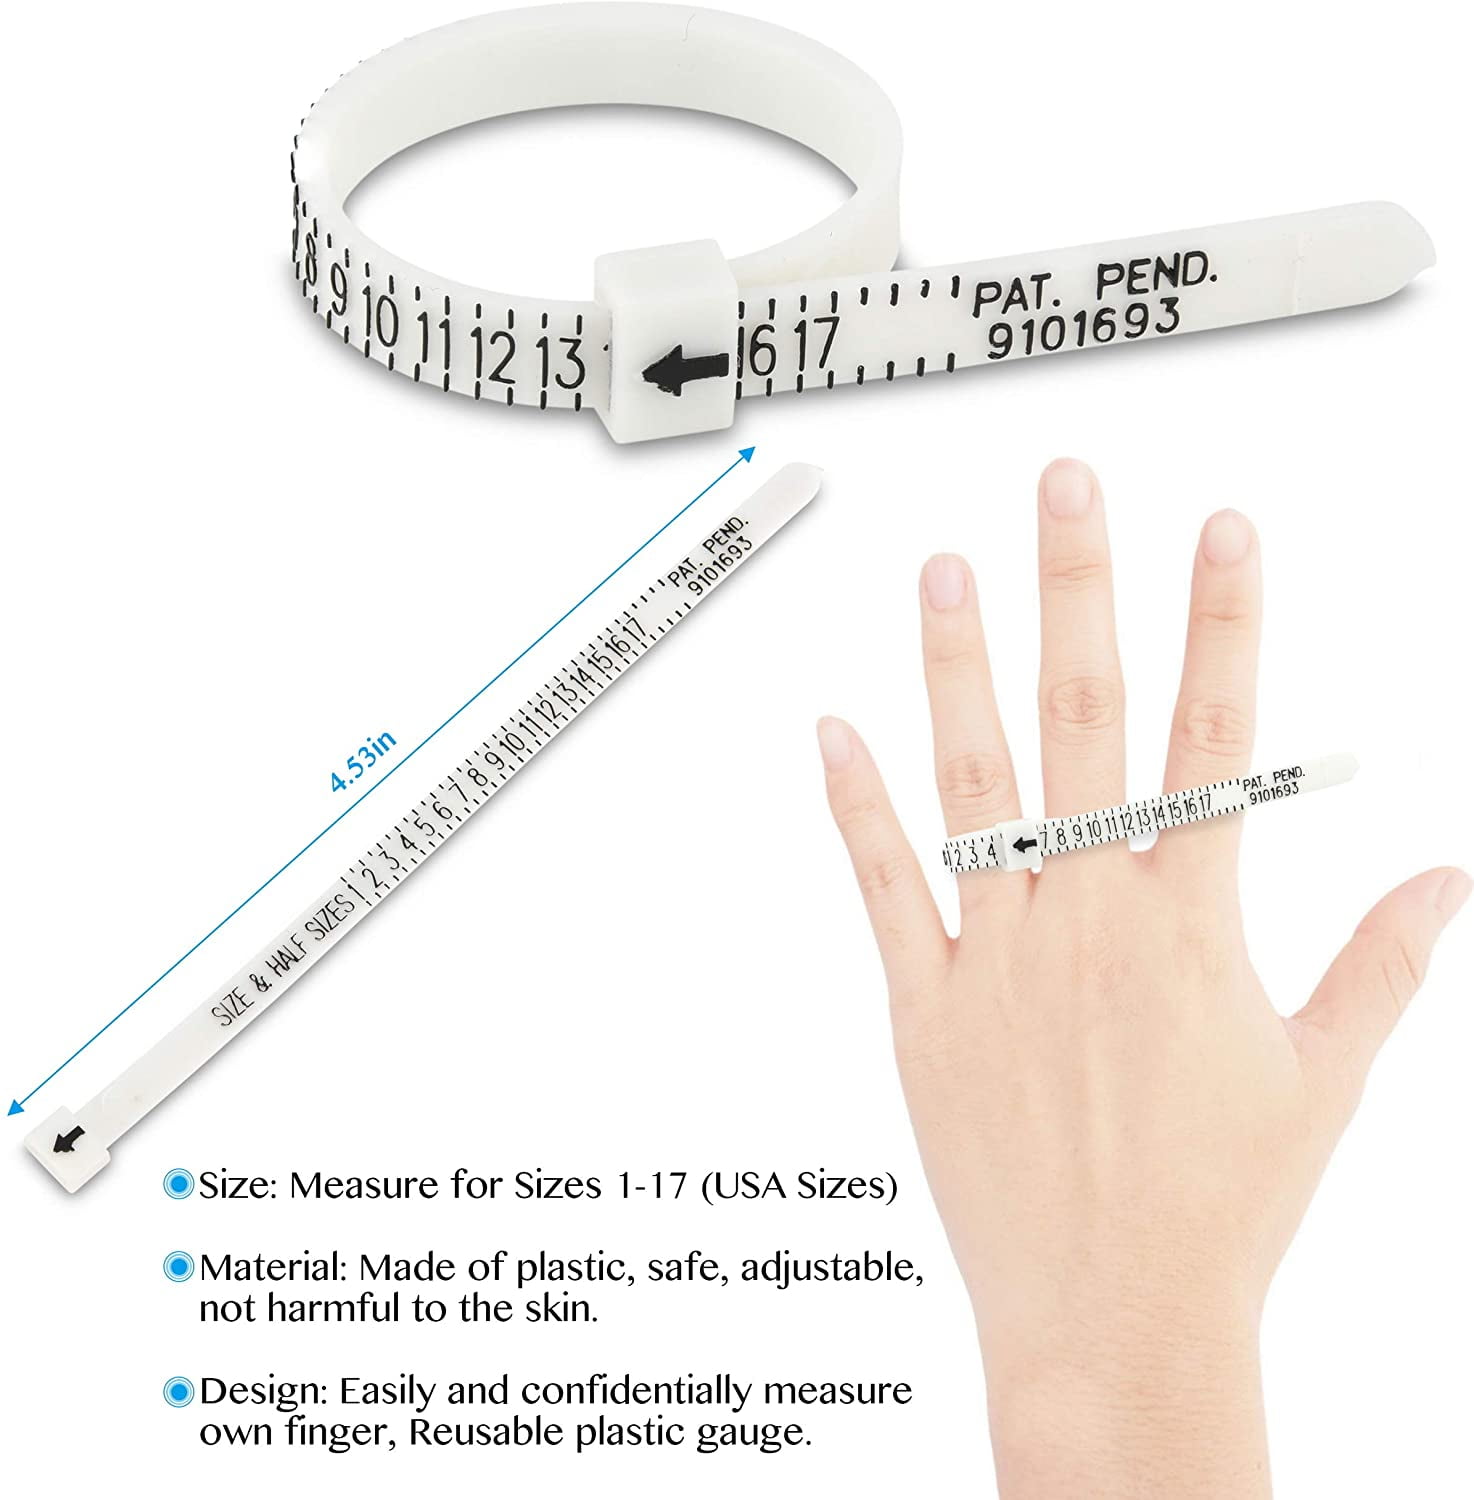 Ring Finger Sizer, Measuring Your Ring Size